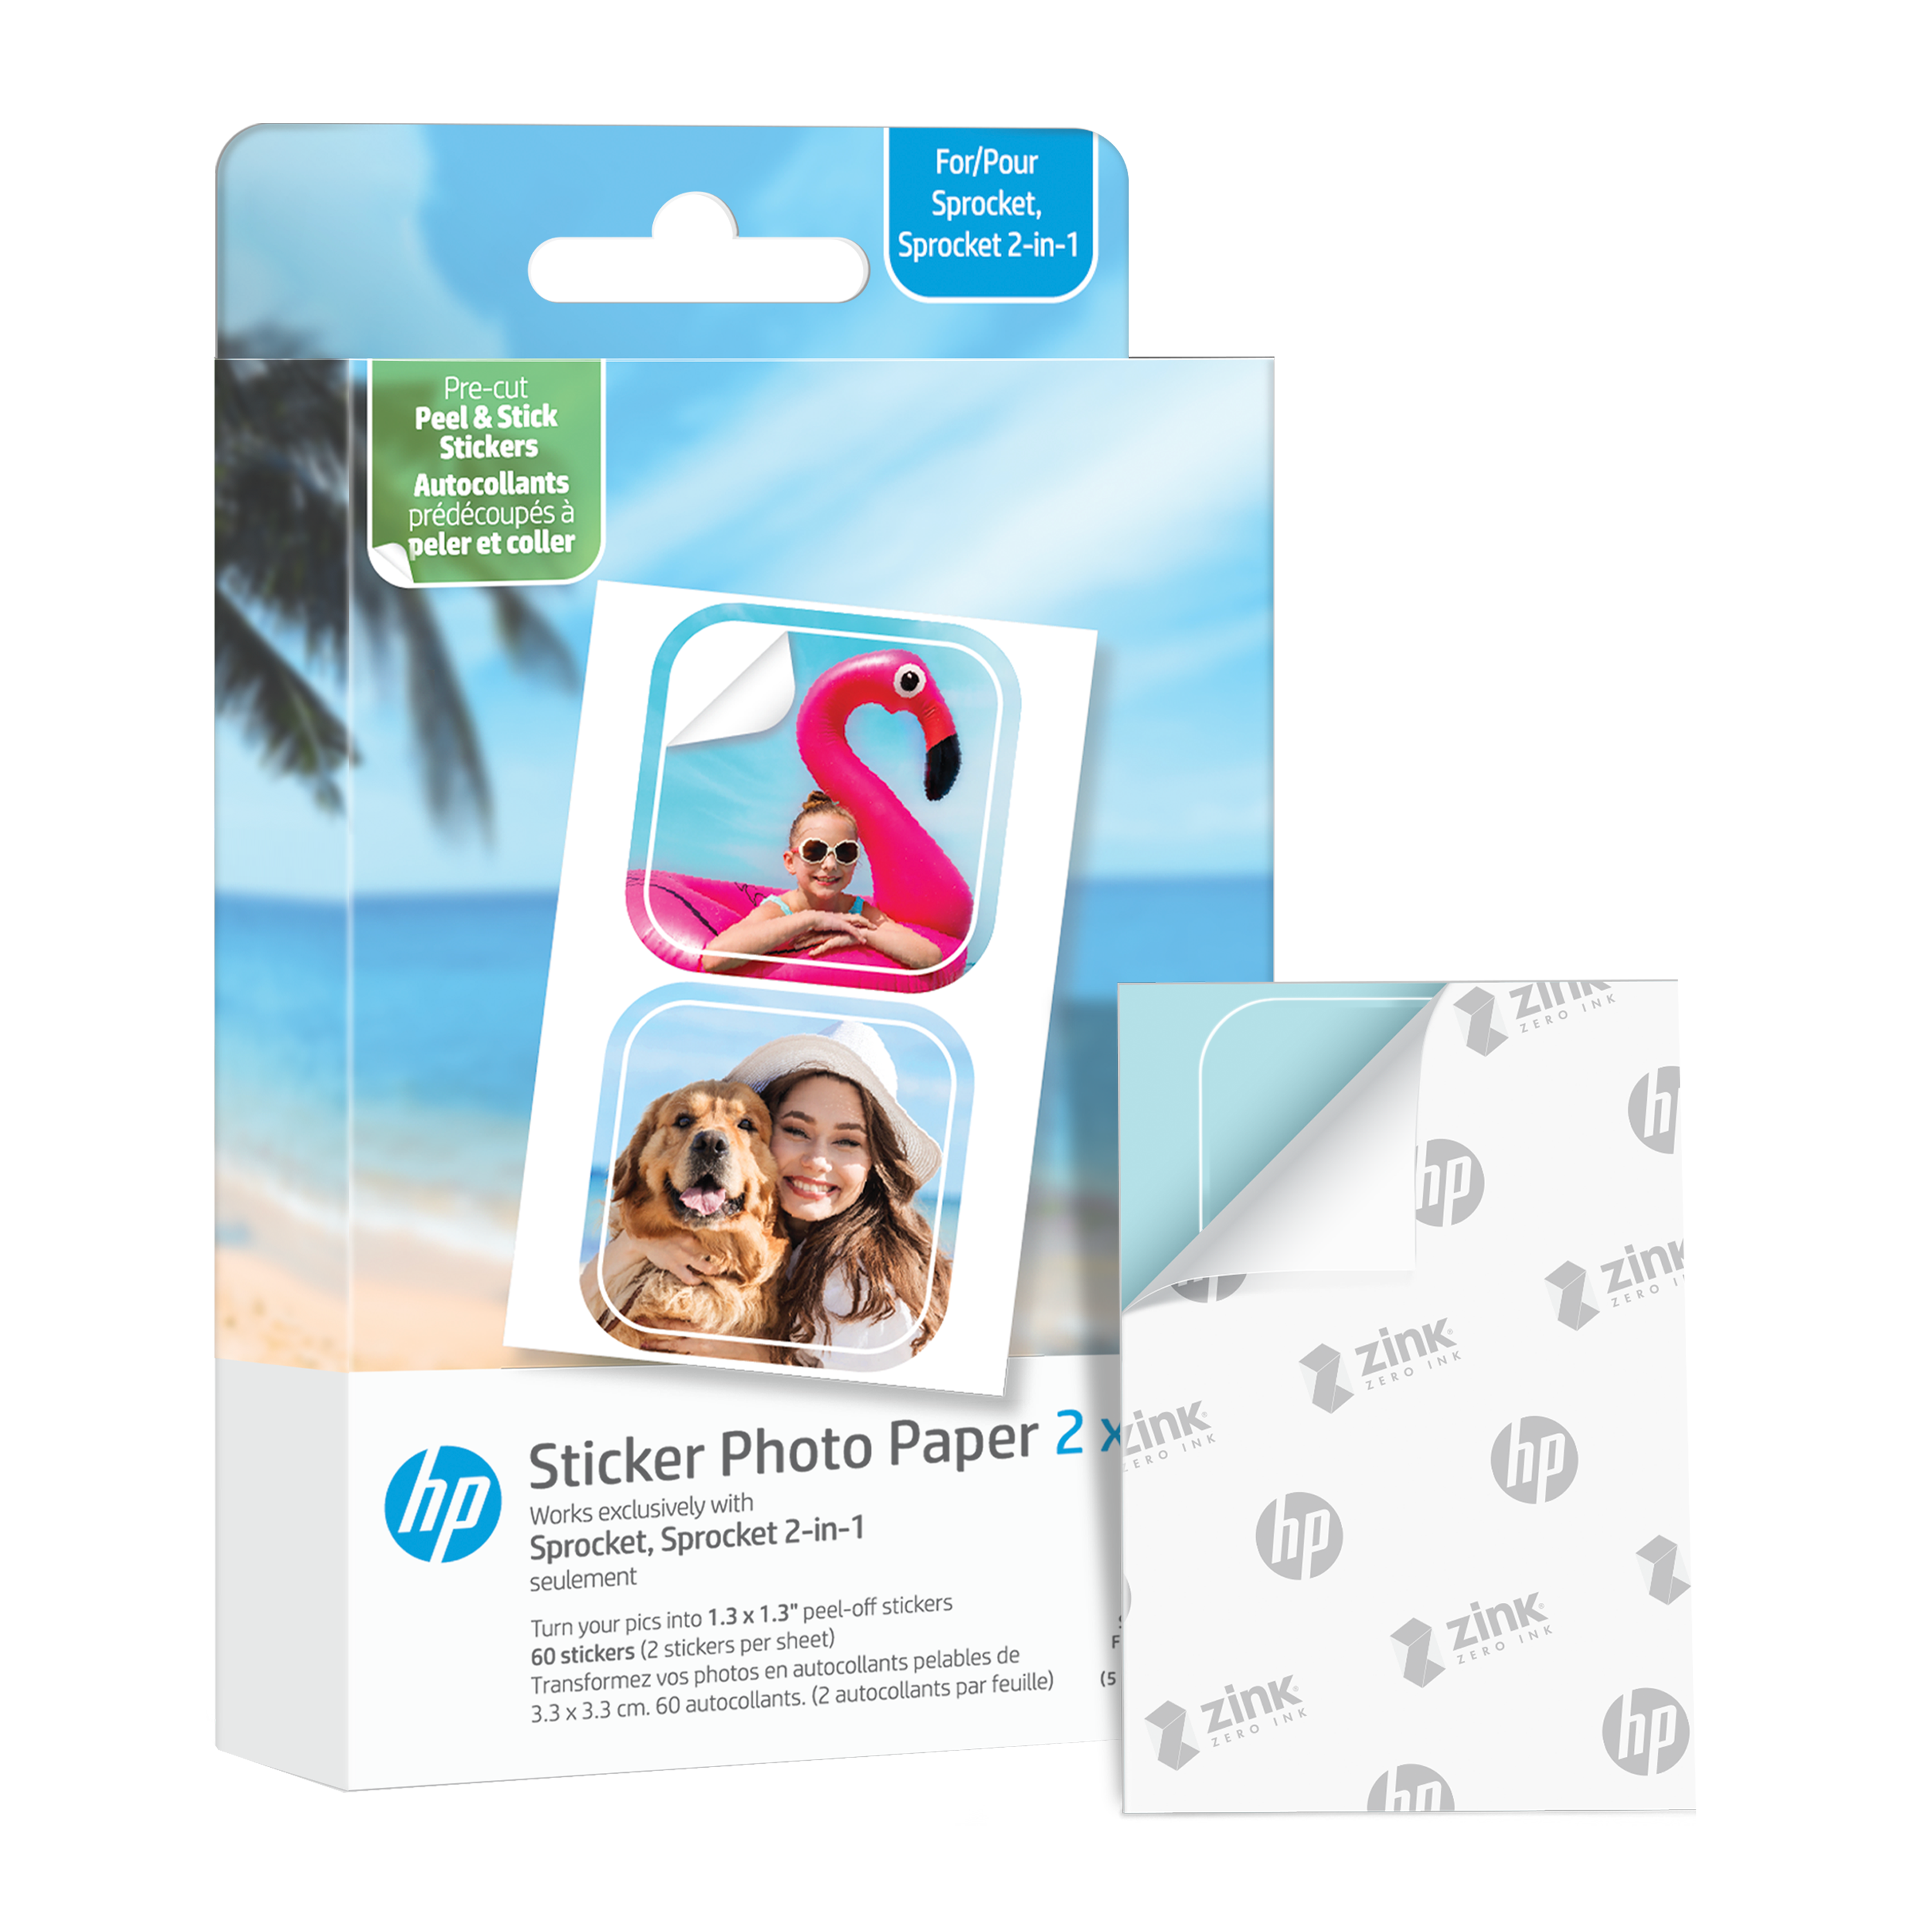 HP Sprocket 2x3 Premium Zink Sticky Photo Paper Compatible with HP